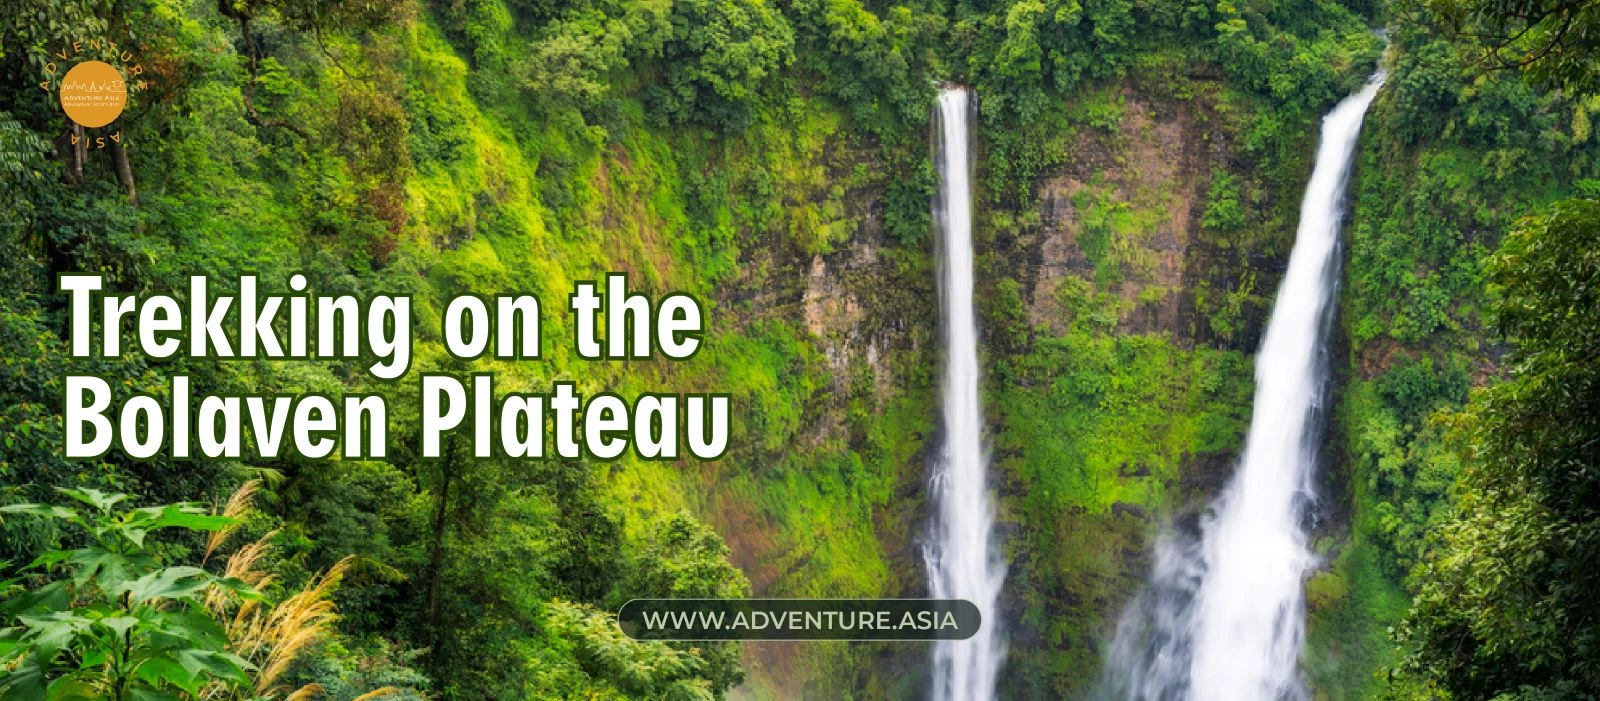 Trekking on the Bolaven Plateau: A Guide to Unforgettable Laotian Adventures